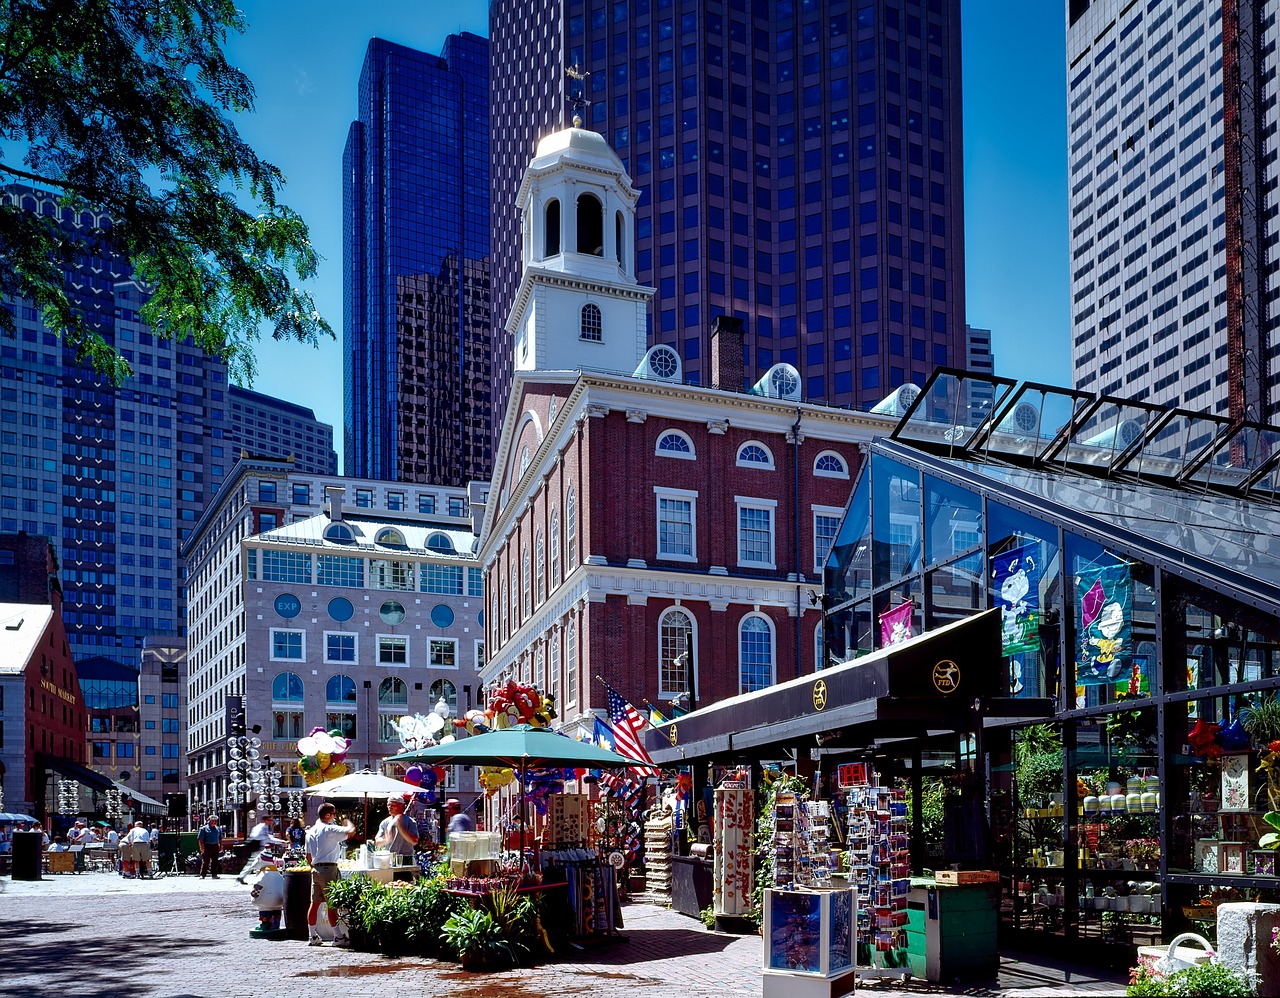 Historical Boston and Culinary Delights in 2 Days